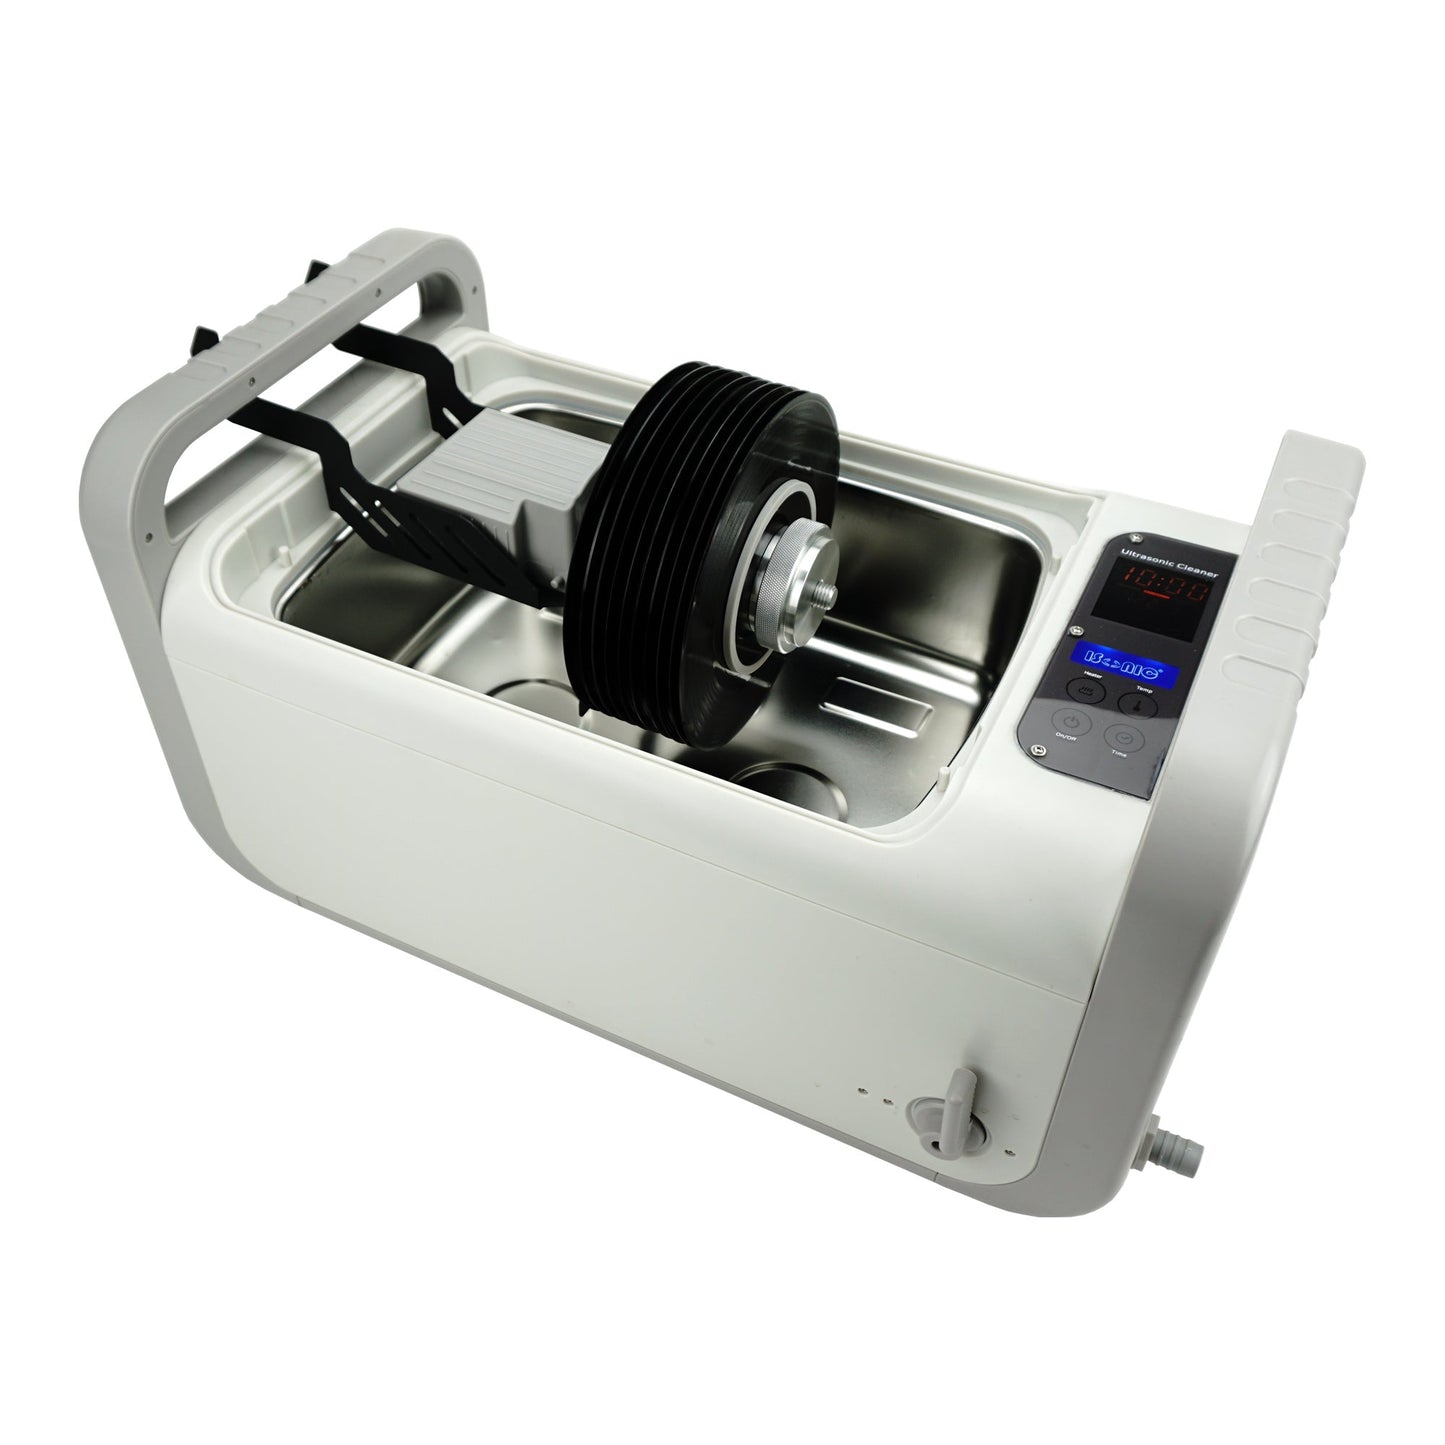 P4875-NH+MVR5 (almost new) | iSonic® Ultrasonic Vinyl Record Cleaner for 5-LPs, 2Gal/7.5L, Free Shipping!